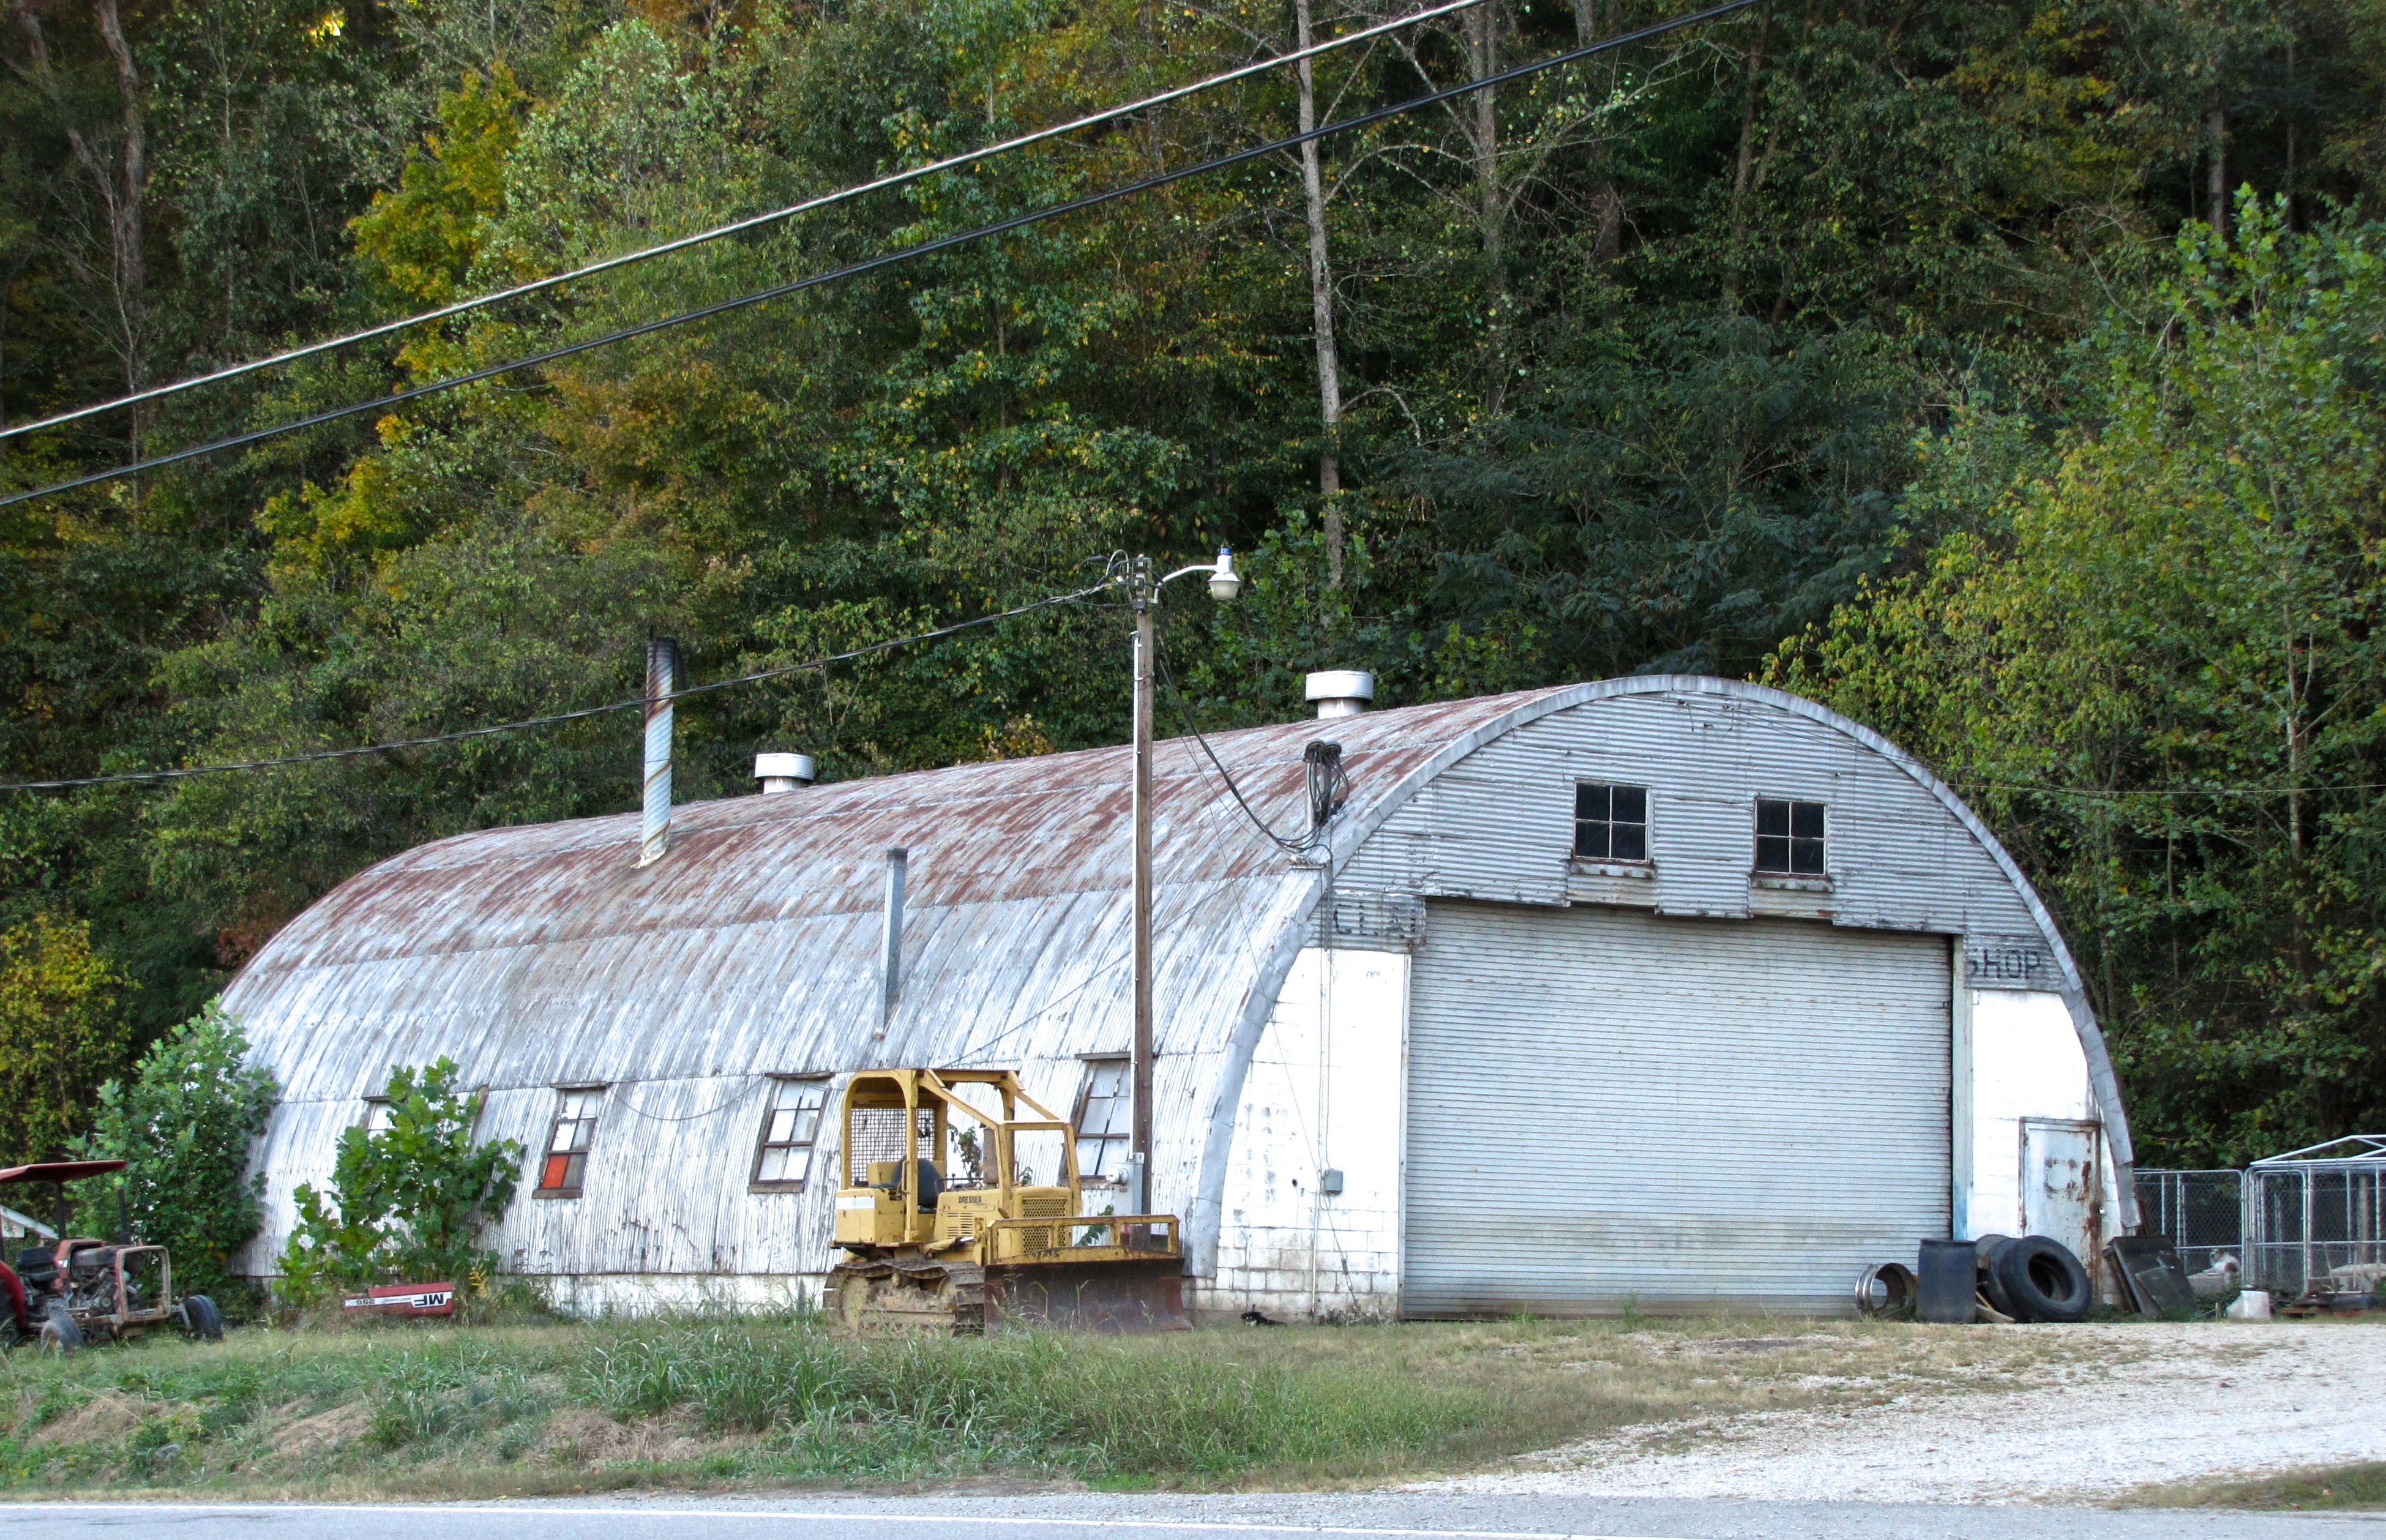 quonset hut in Terms Of Service, IL